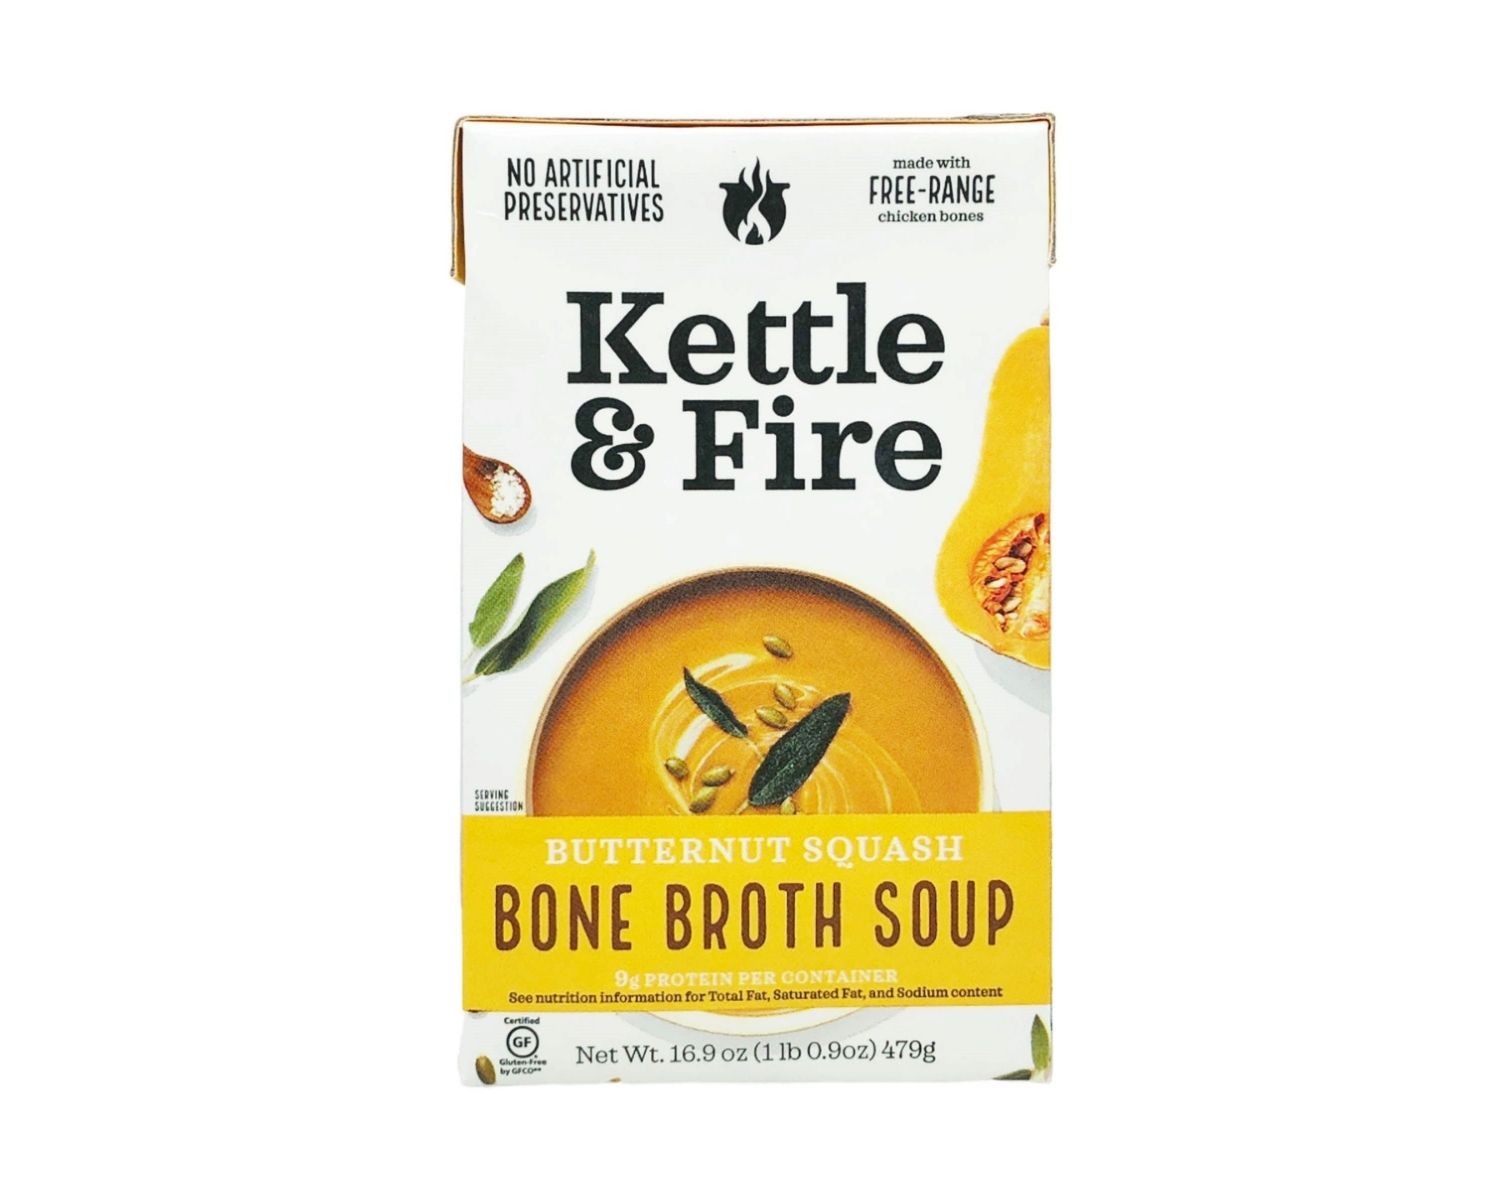 9-intriguing-facts-about-kettle-and-fire-bone-broth